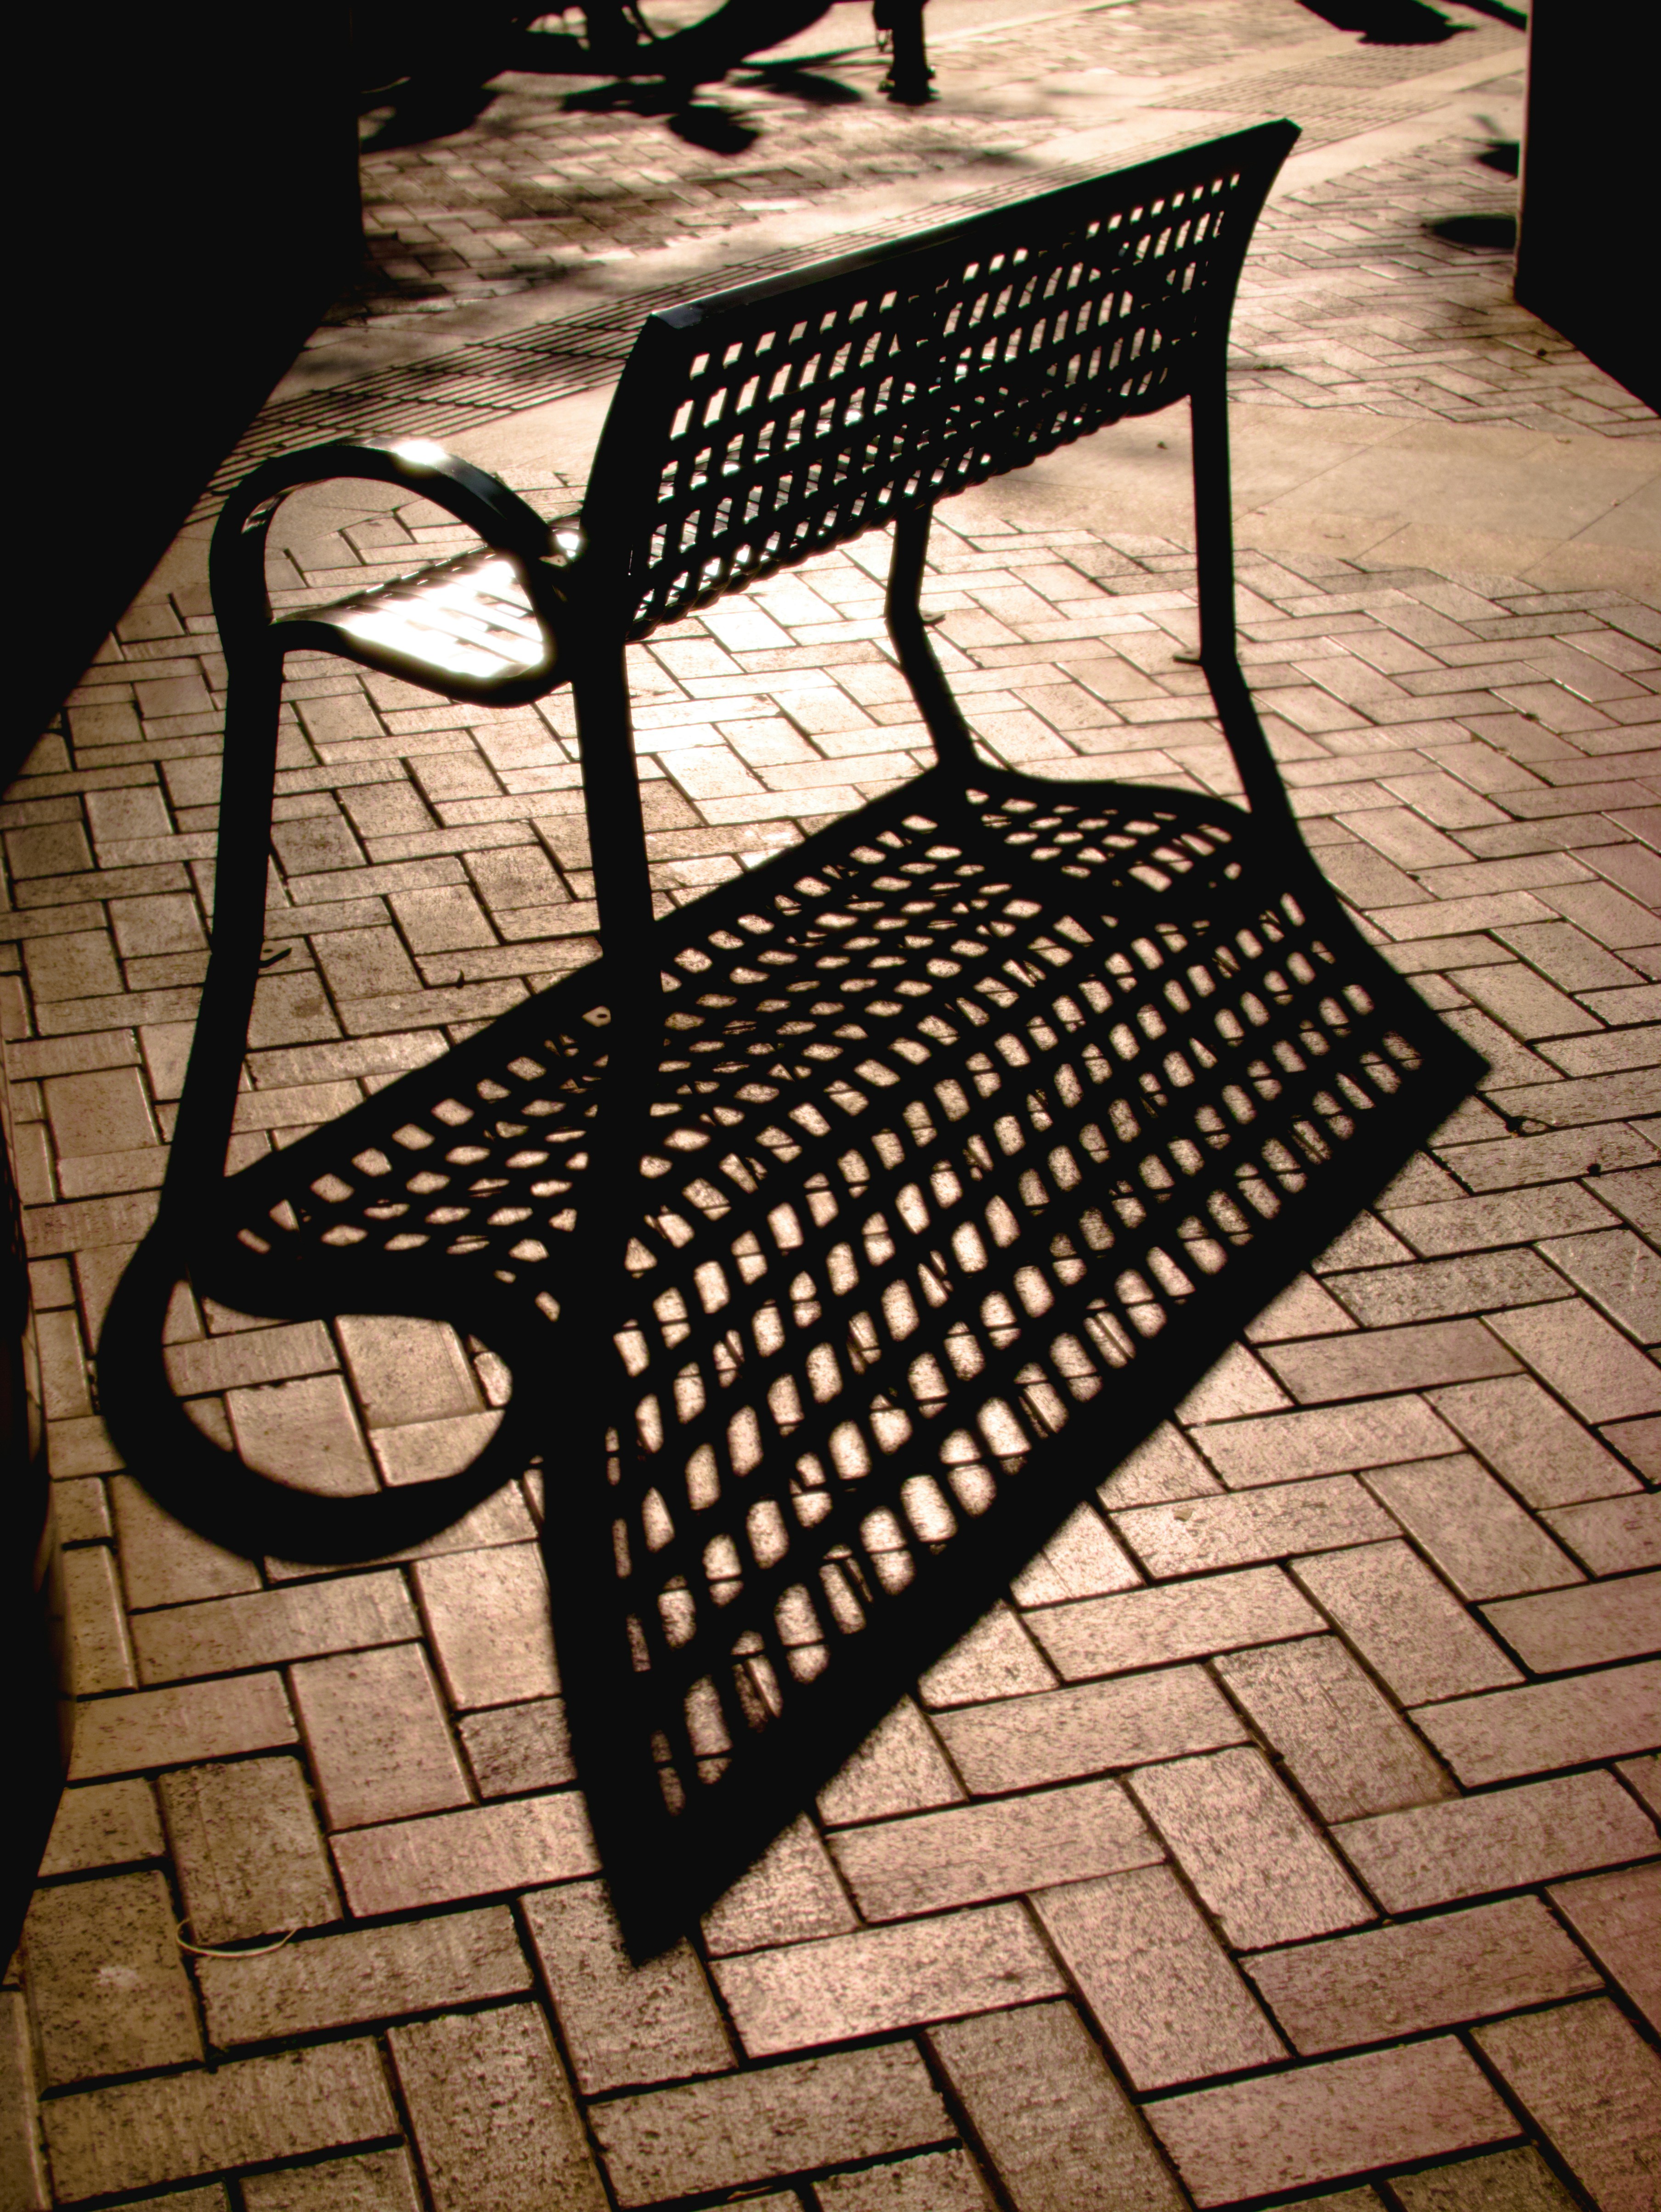 Shadow of a bench